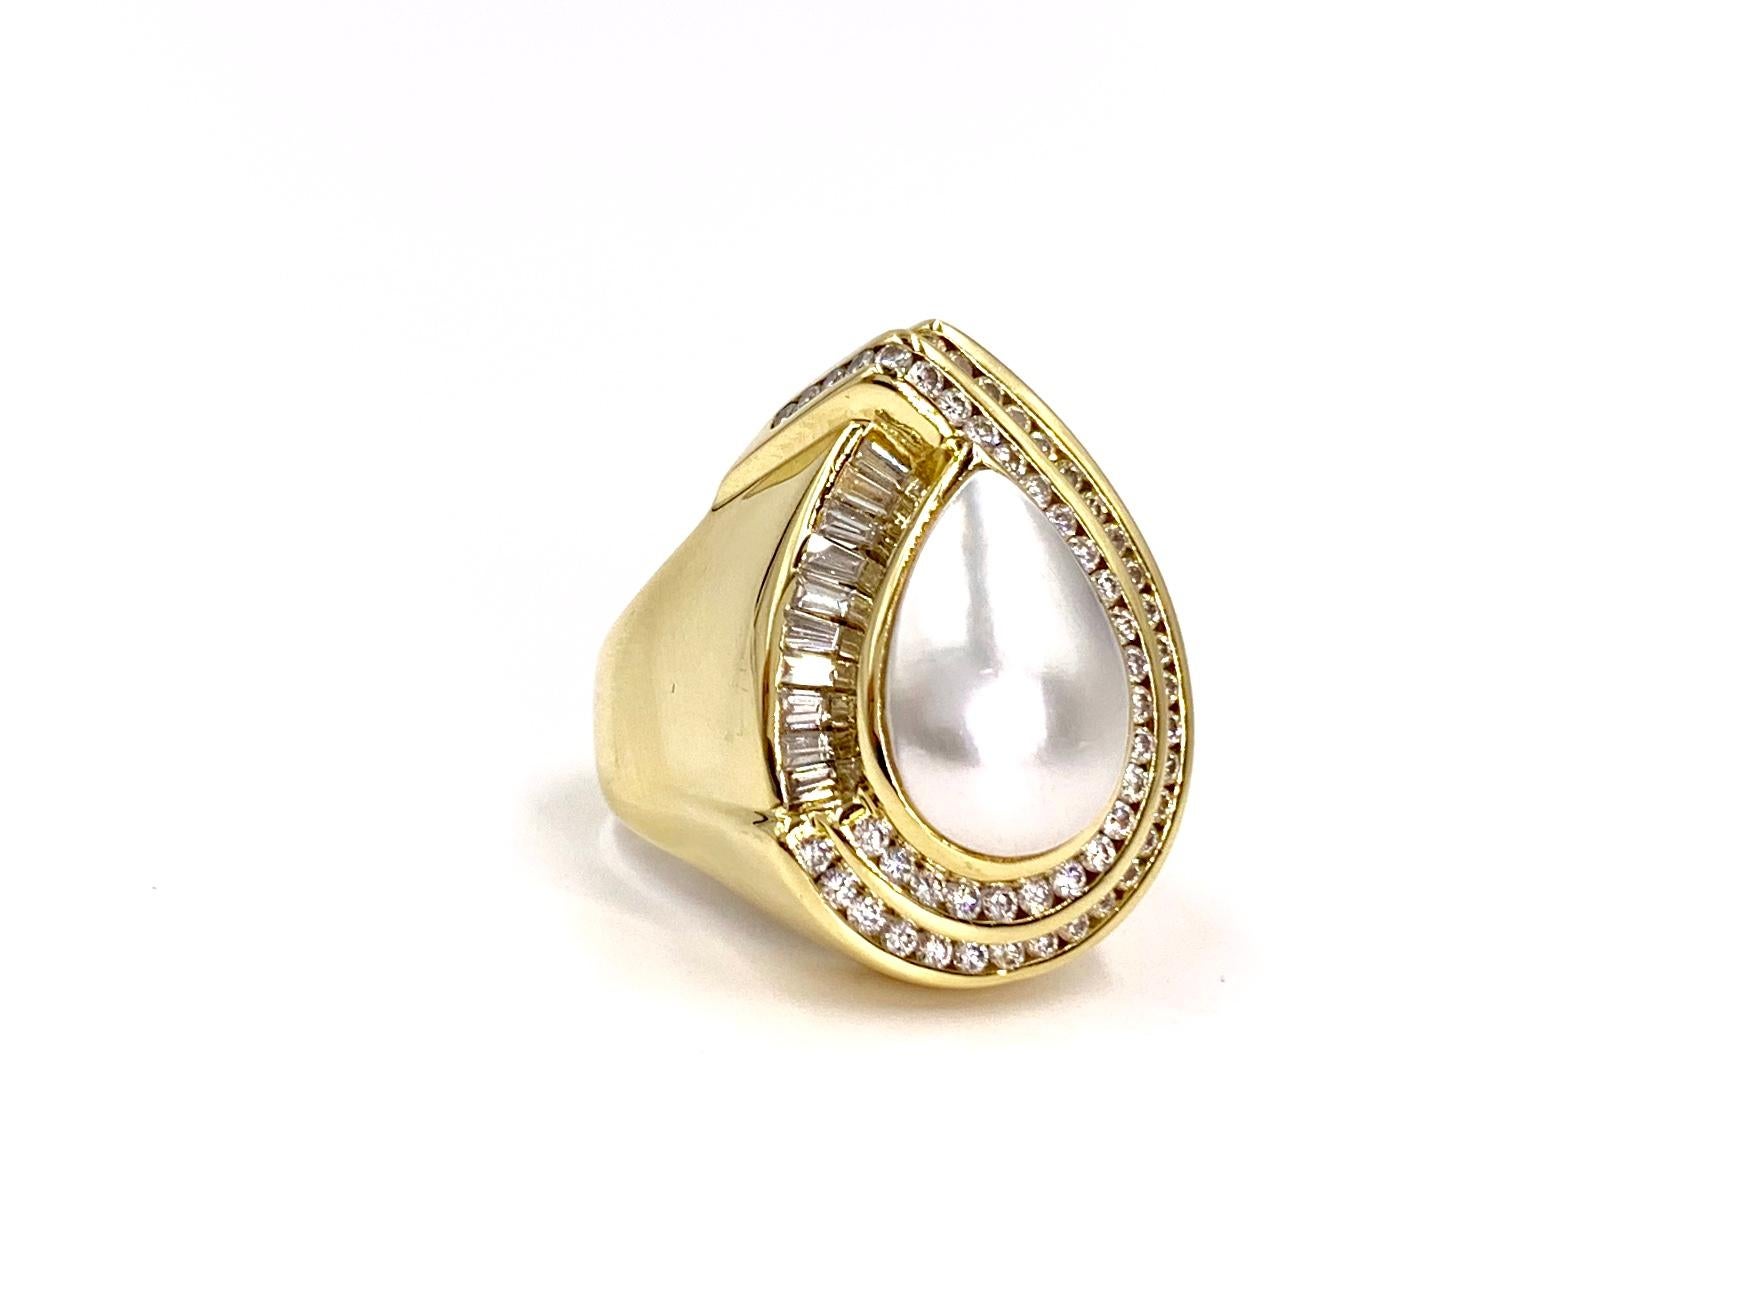 A true statement piece, expertly crafted by Charles Krypell. This 18 karat yellow gold cocktail ring features a large lustrous genuine pear shape mabe pearl surrounded by .98 carats of round brilliant and baguette cut diamonds. Diamond quality is